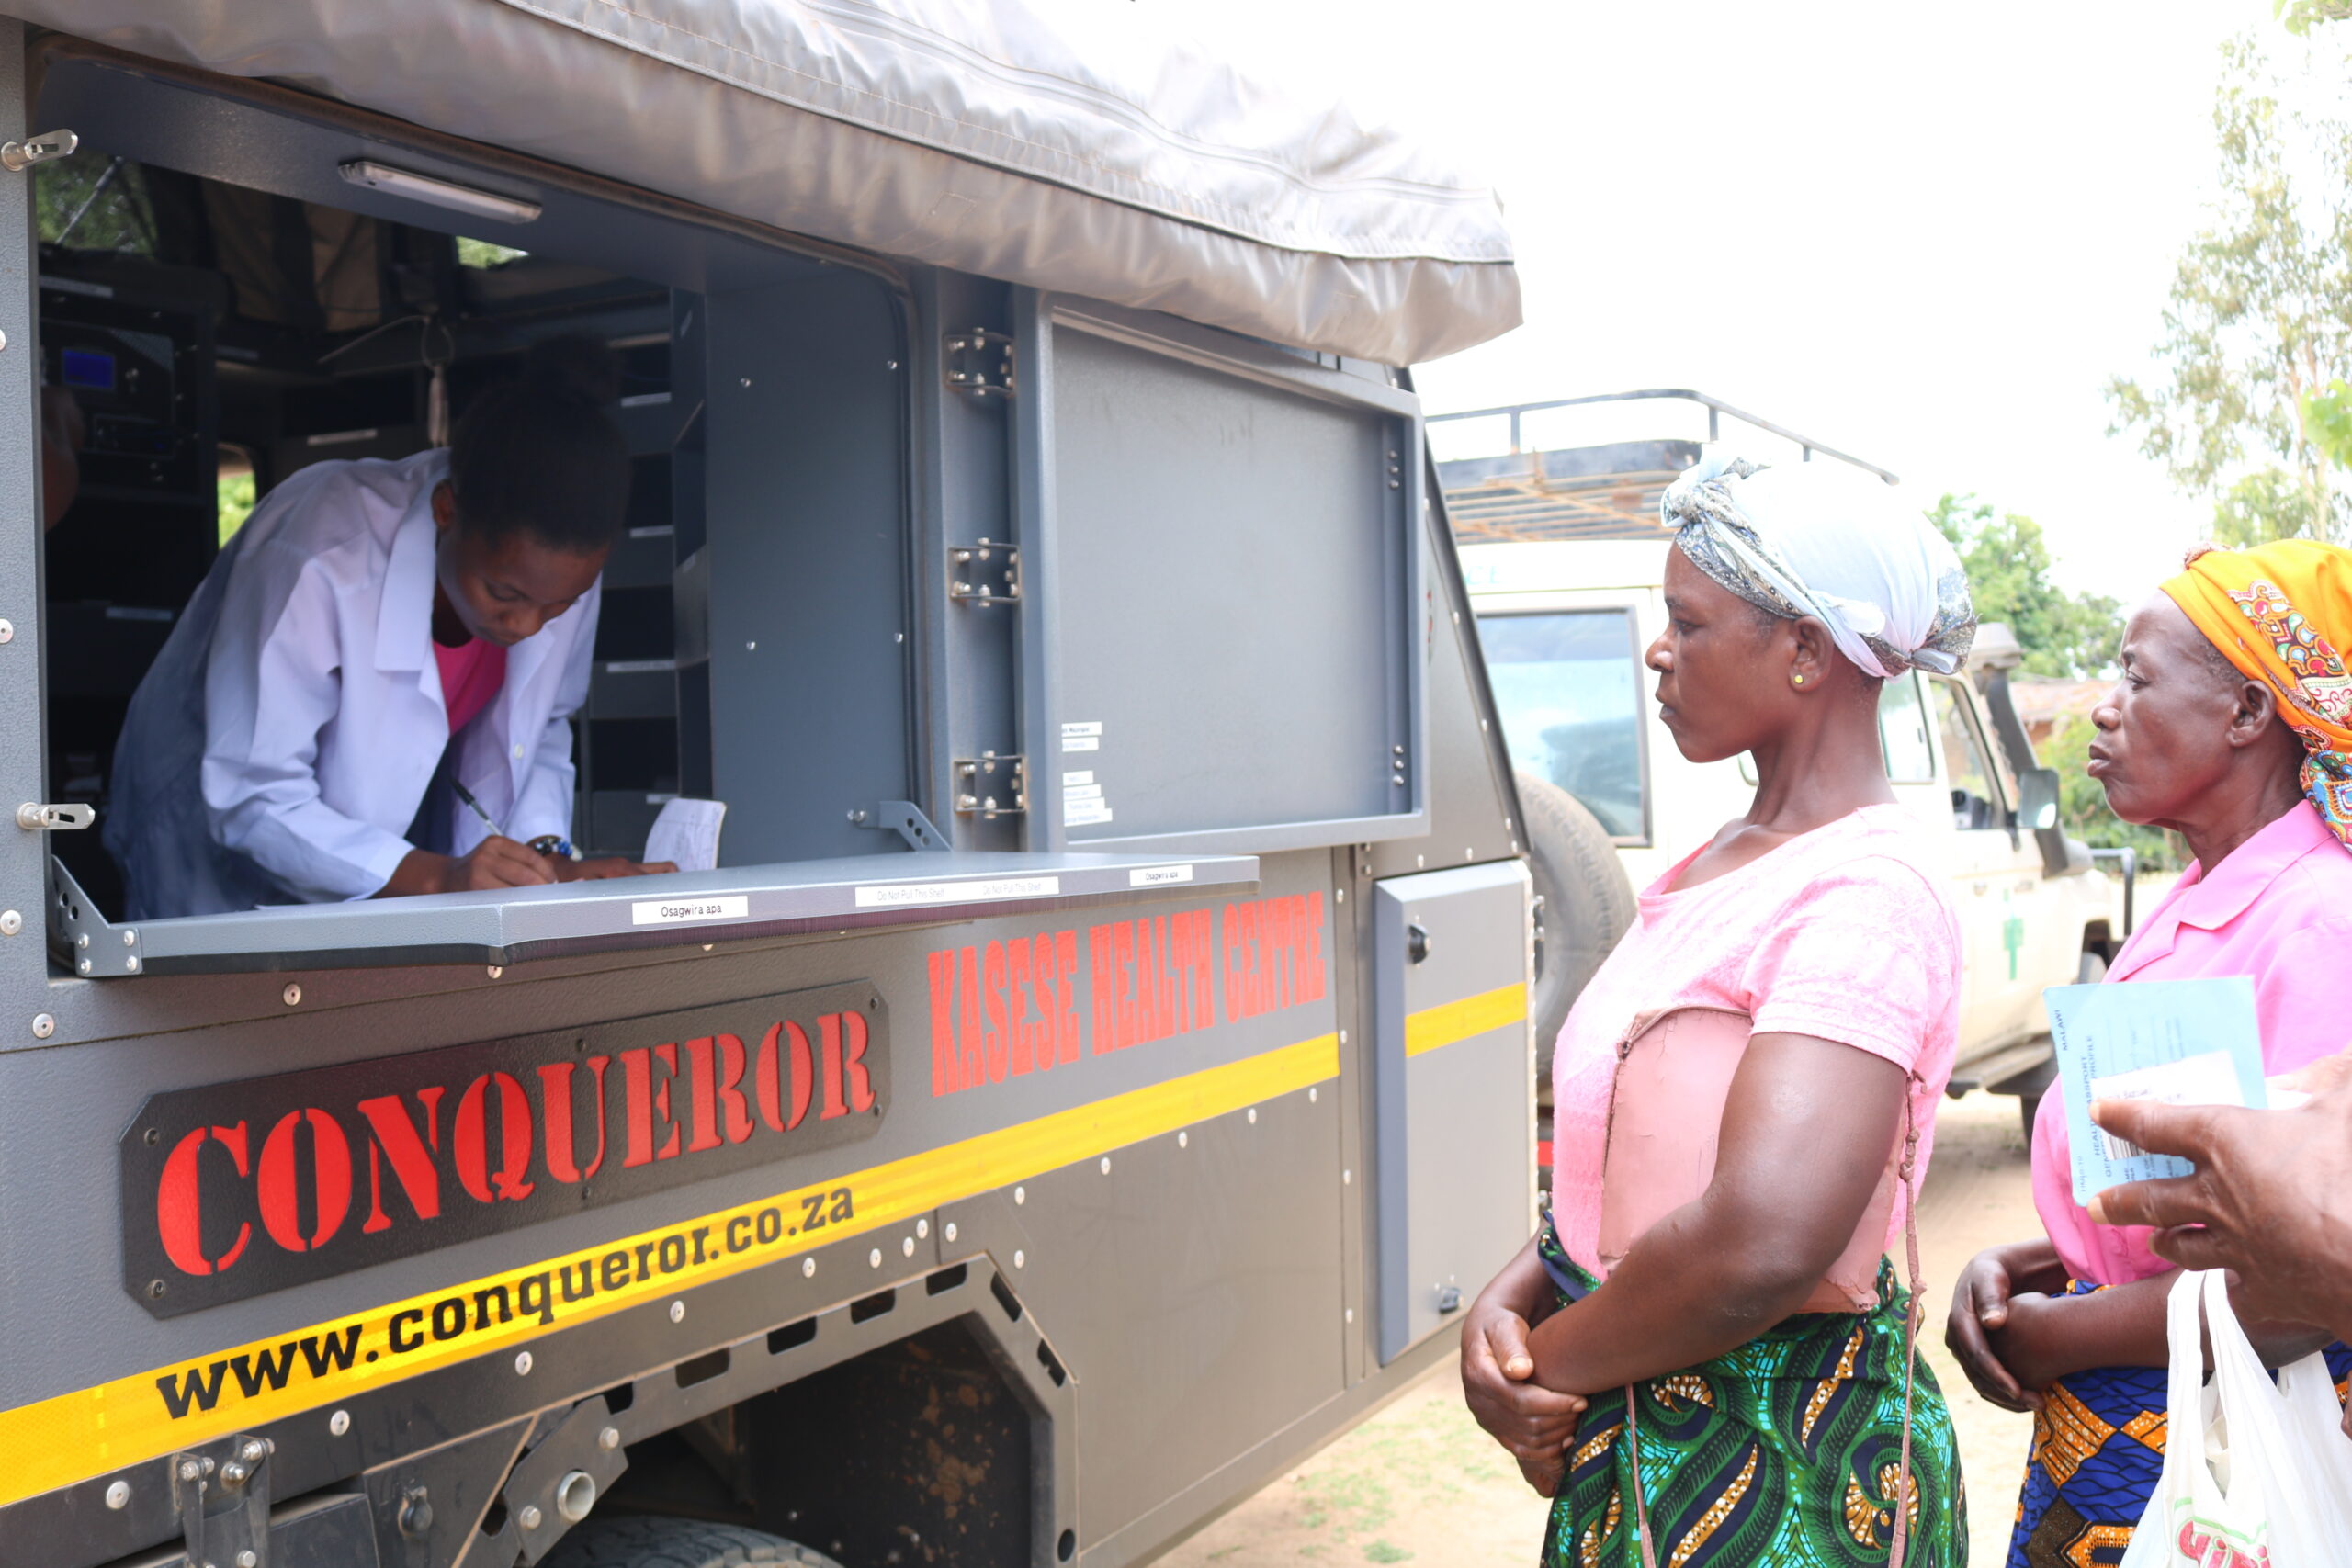 Conducting Mobile Outreach Clinics in Malawi